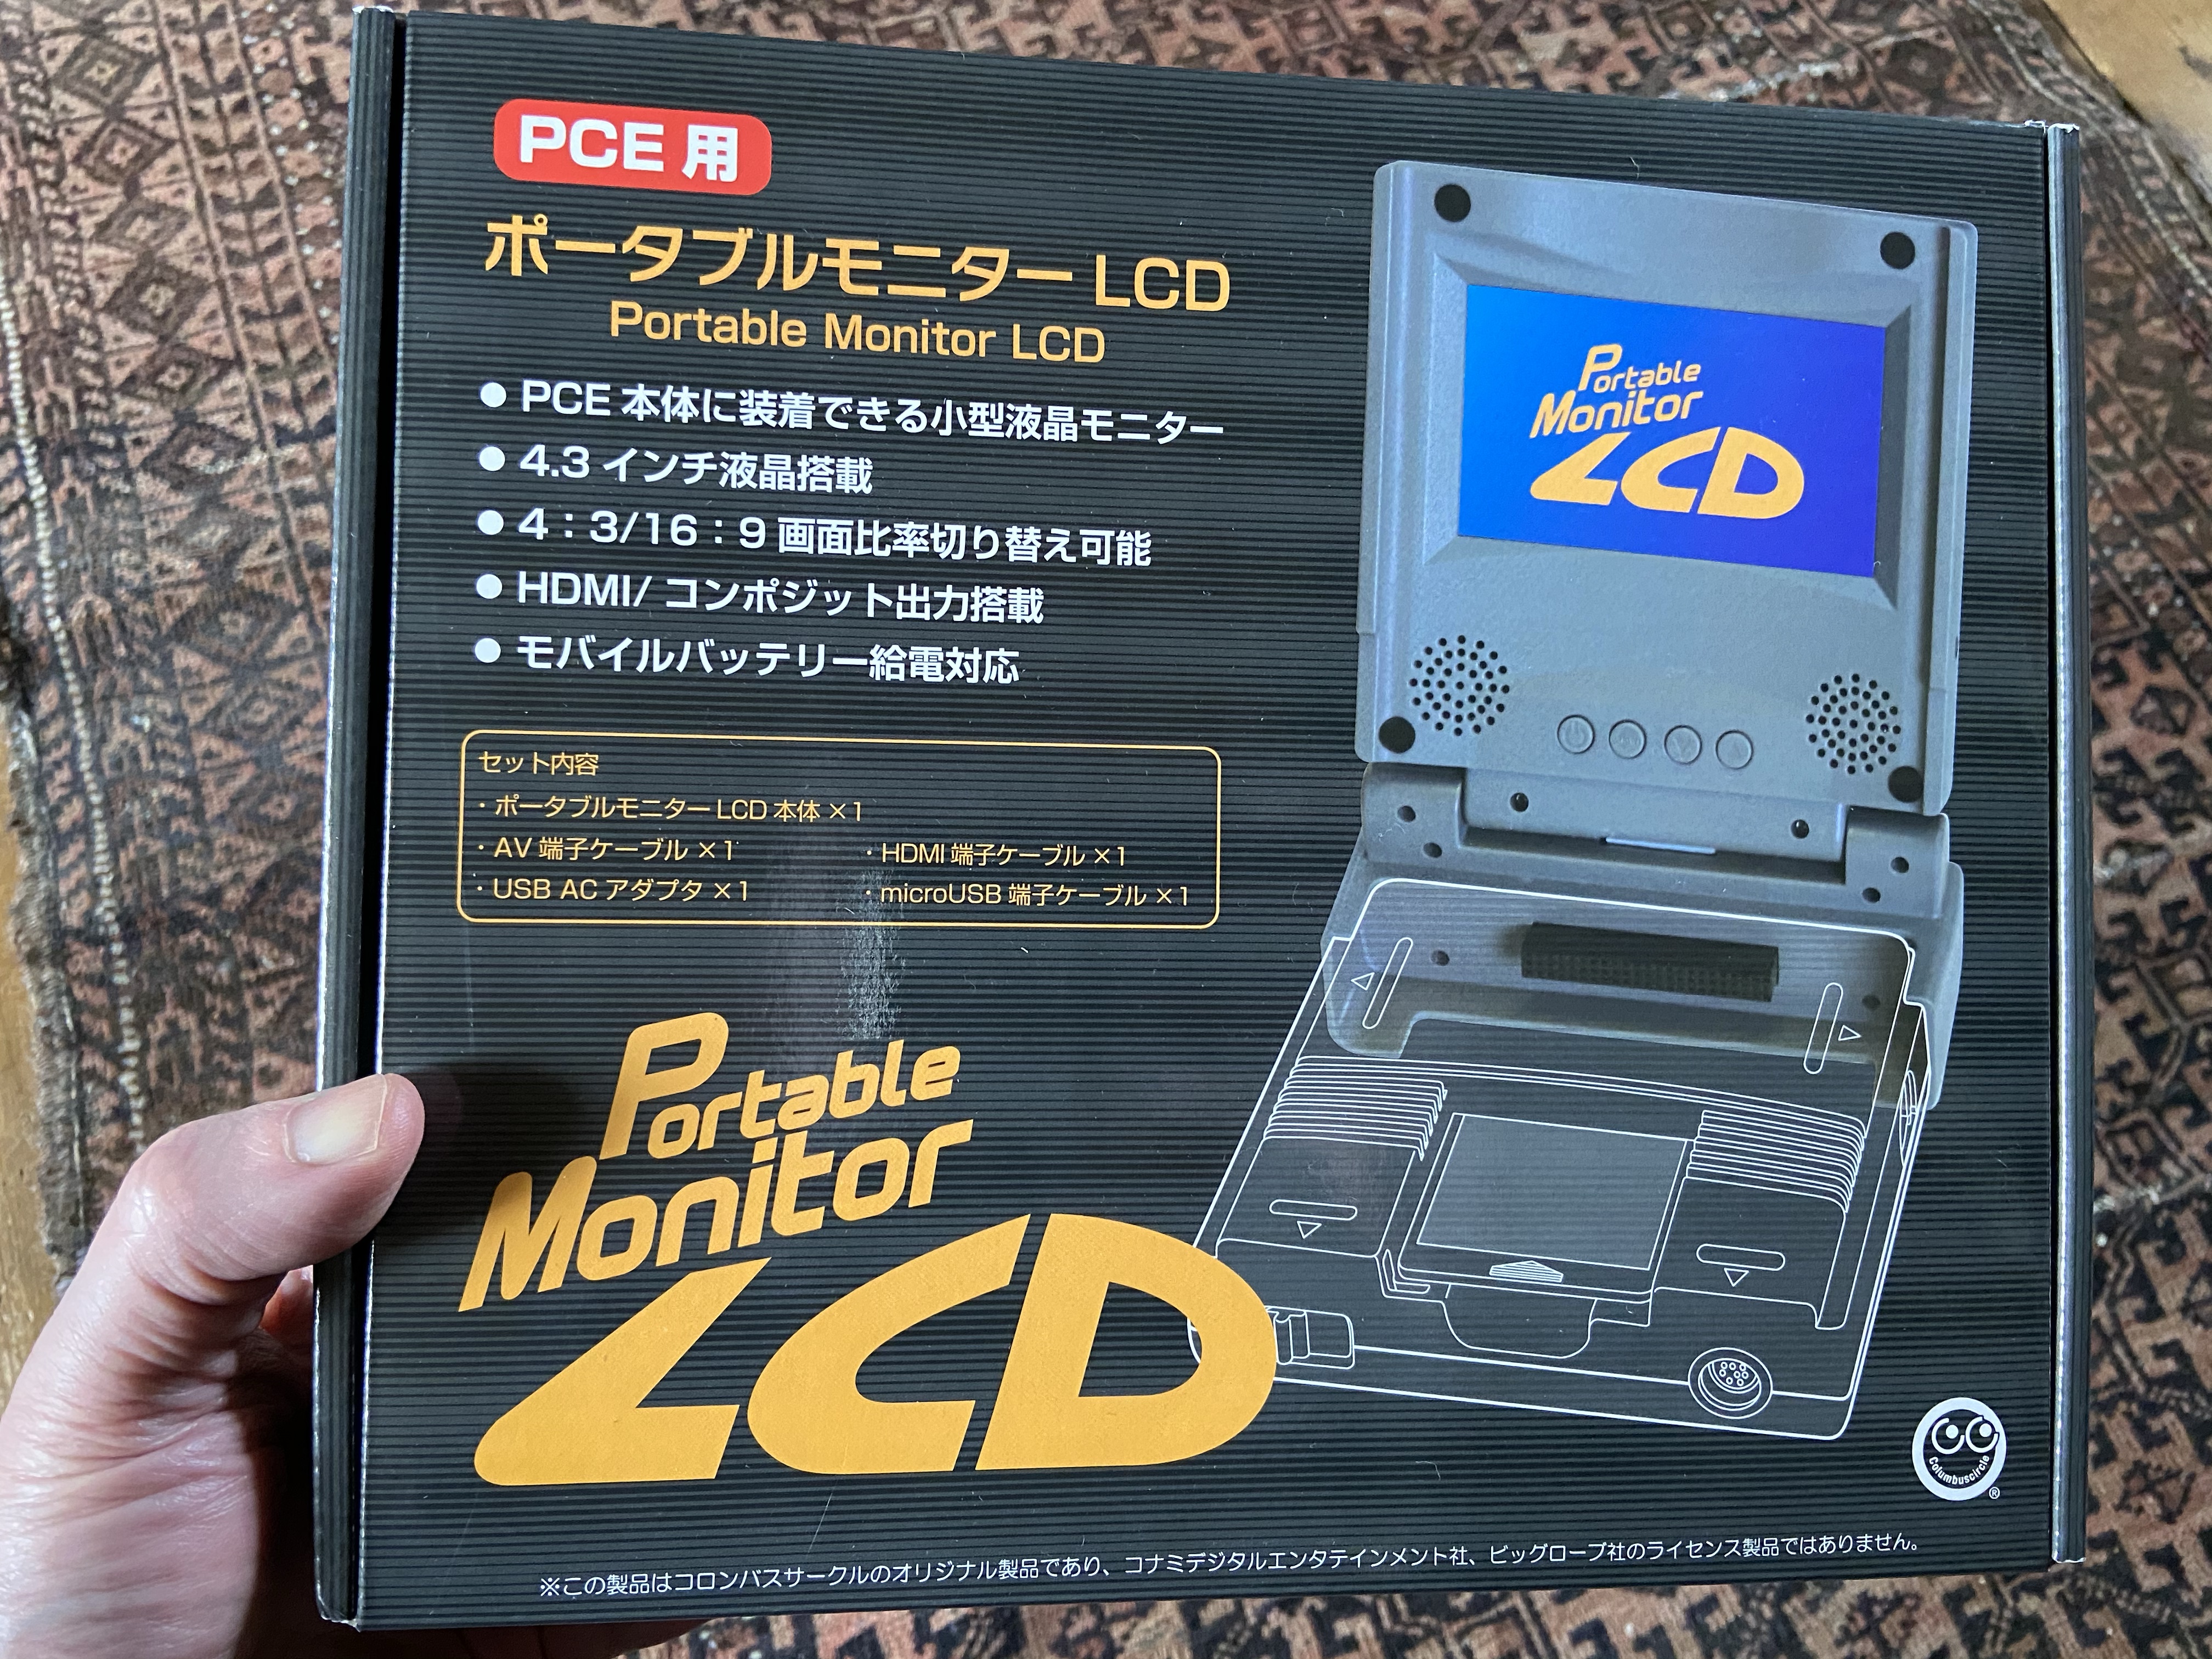 New aftermarket portable monitor for PC Engine